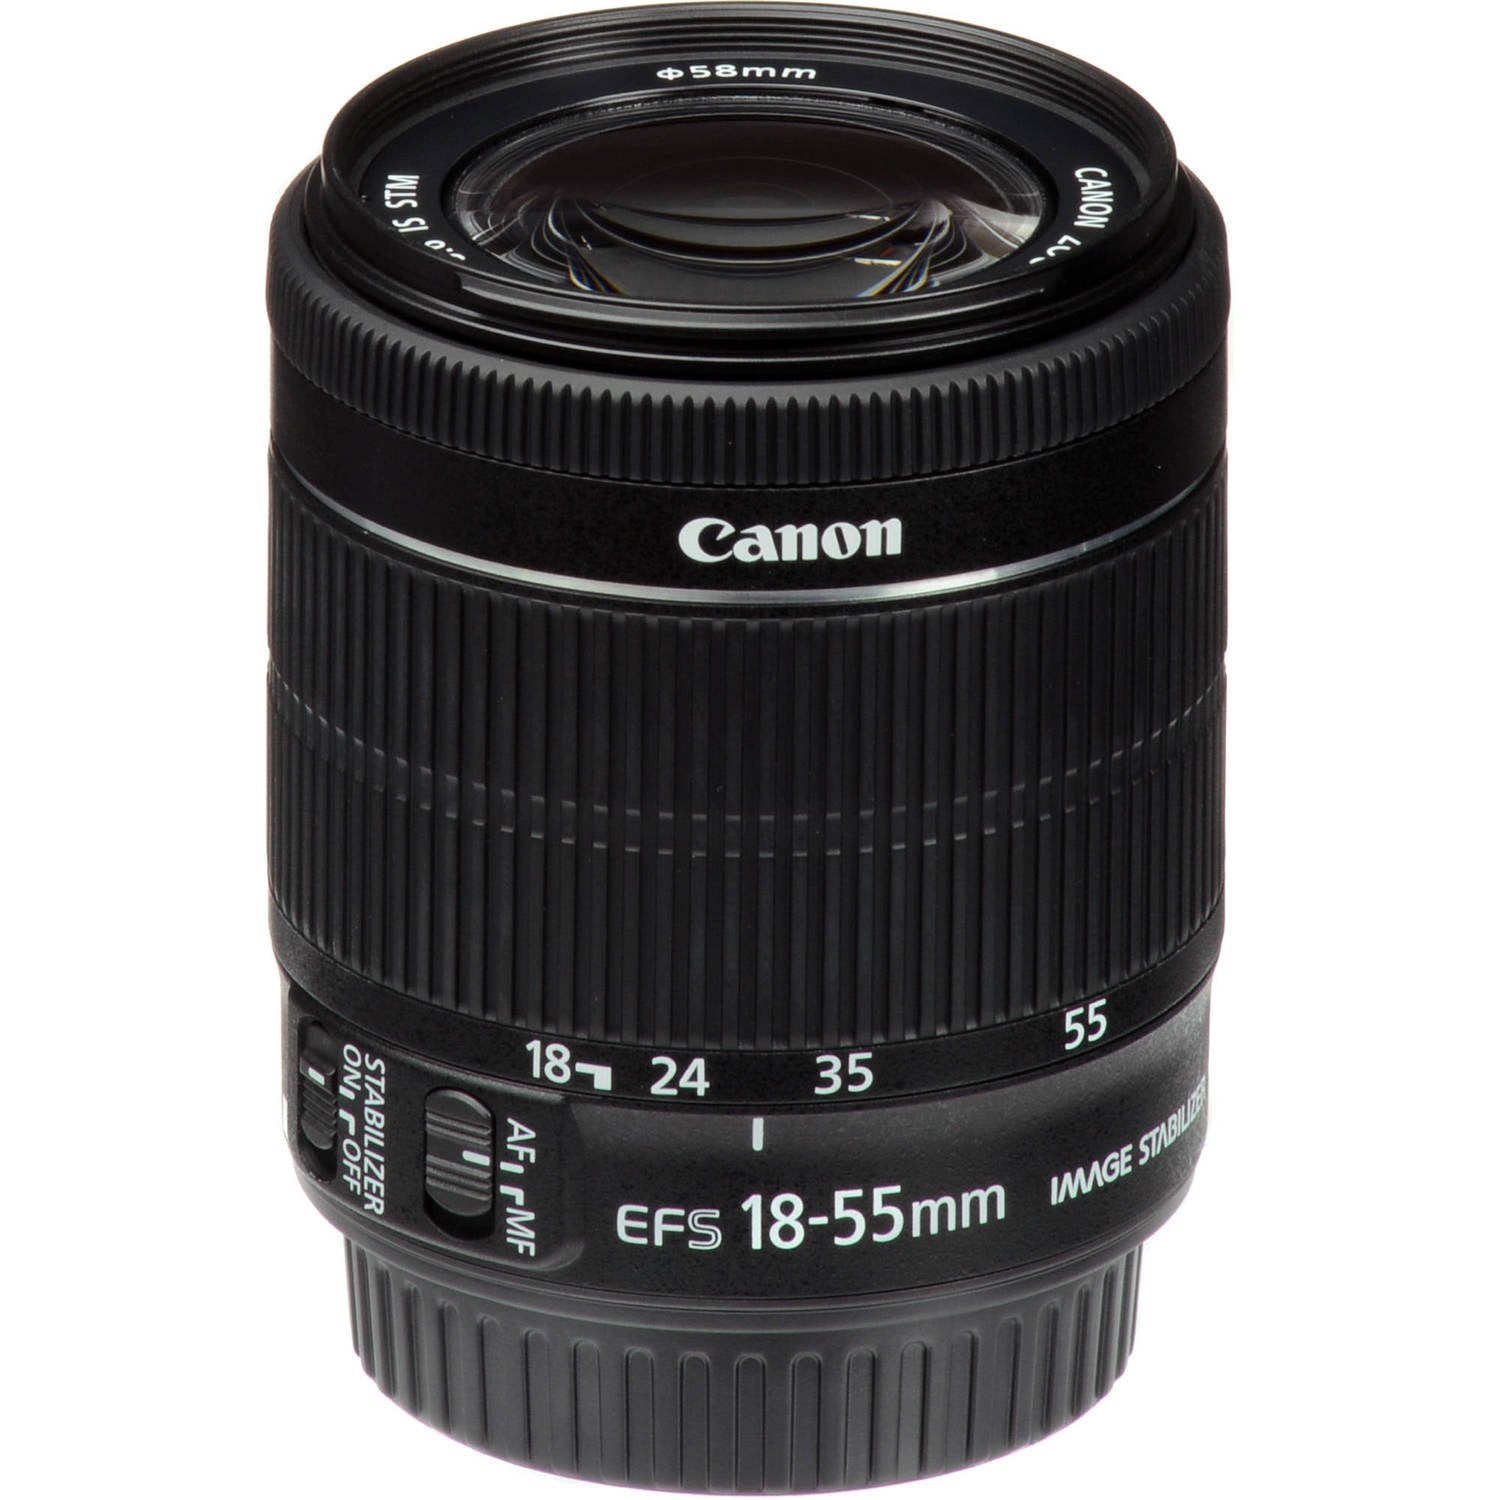 Canon EF-S 18-55mm f/3.5-5.6 IS STM Lens 8114B002 + 58mm 3 Piece Filter Kit + SD Card USB Reader + Deluxe Lens Pouch Bundle